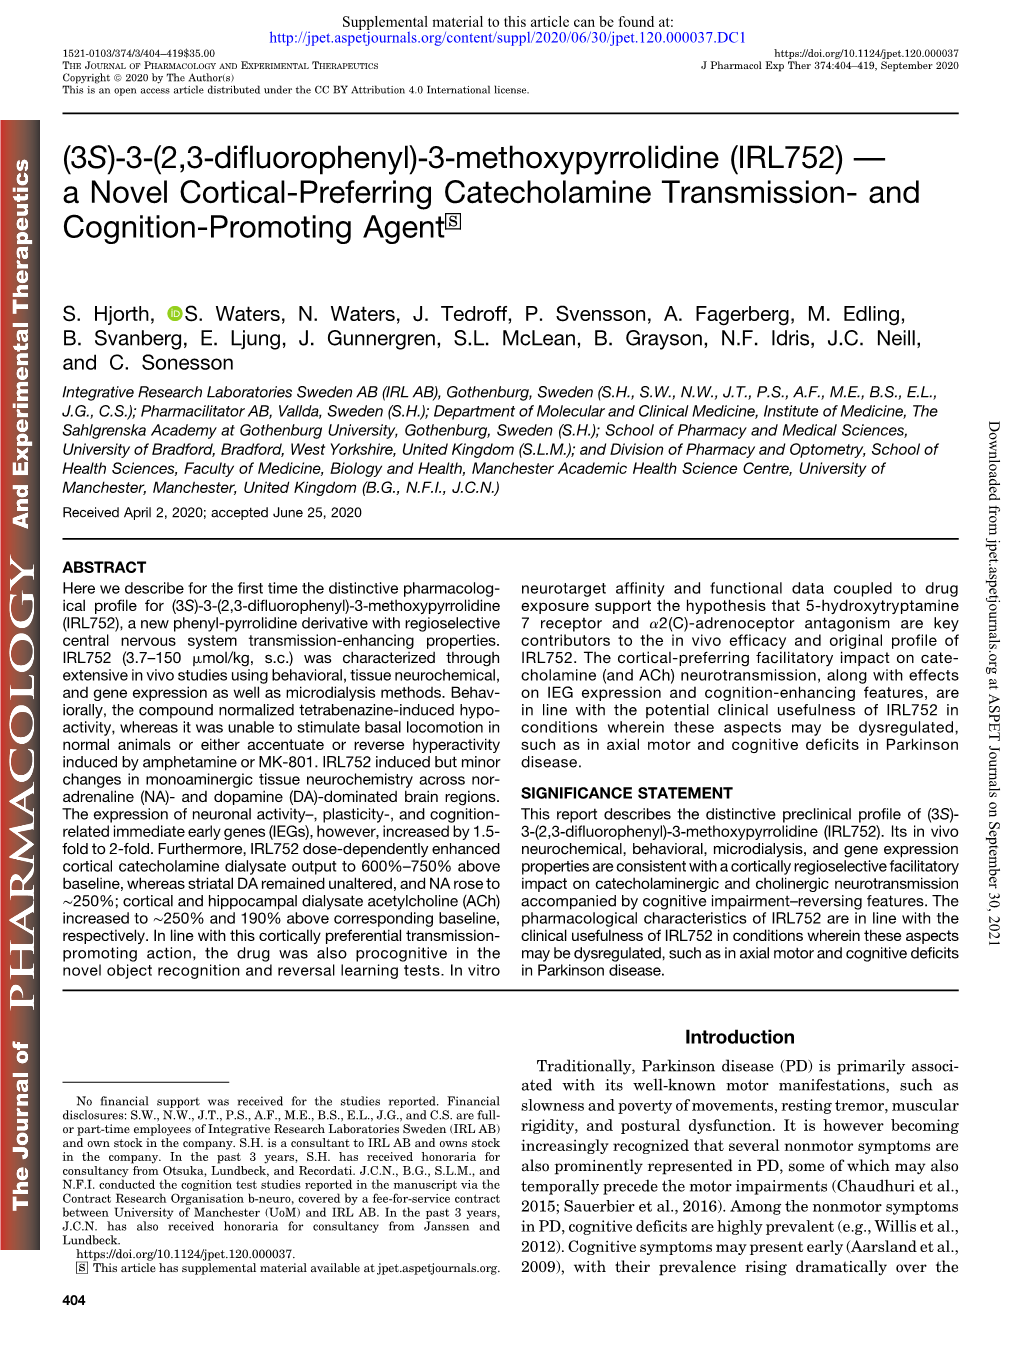 3‐Methoxypyrrolidine (IRL752) — a Novel Cortical-Preferring Catecholamine Transmission- and Cognition-Promoting Agent S